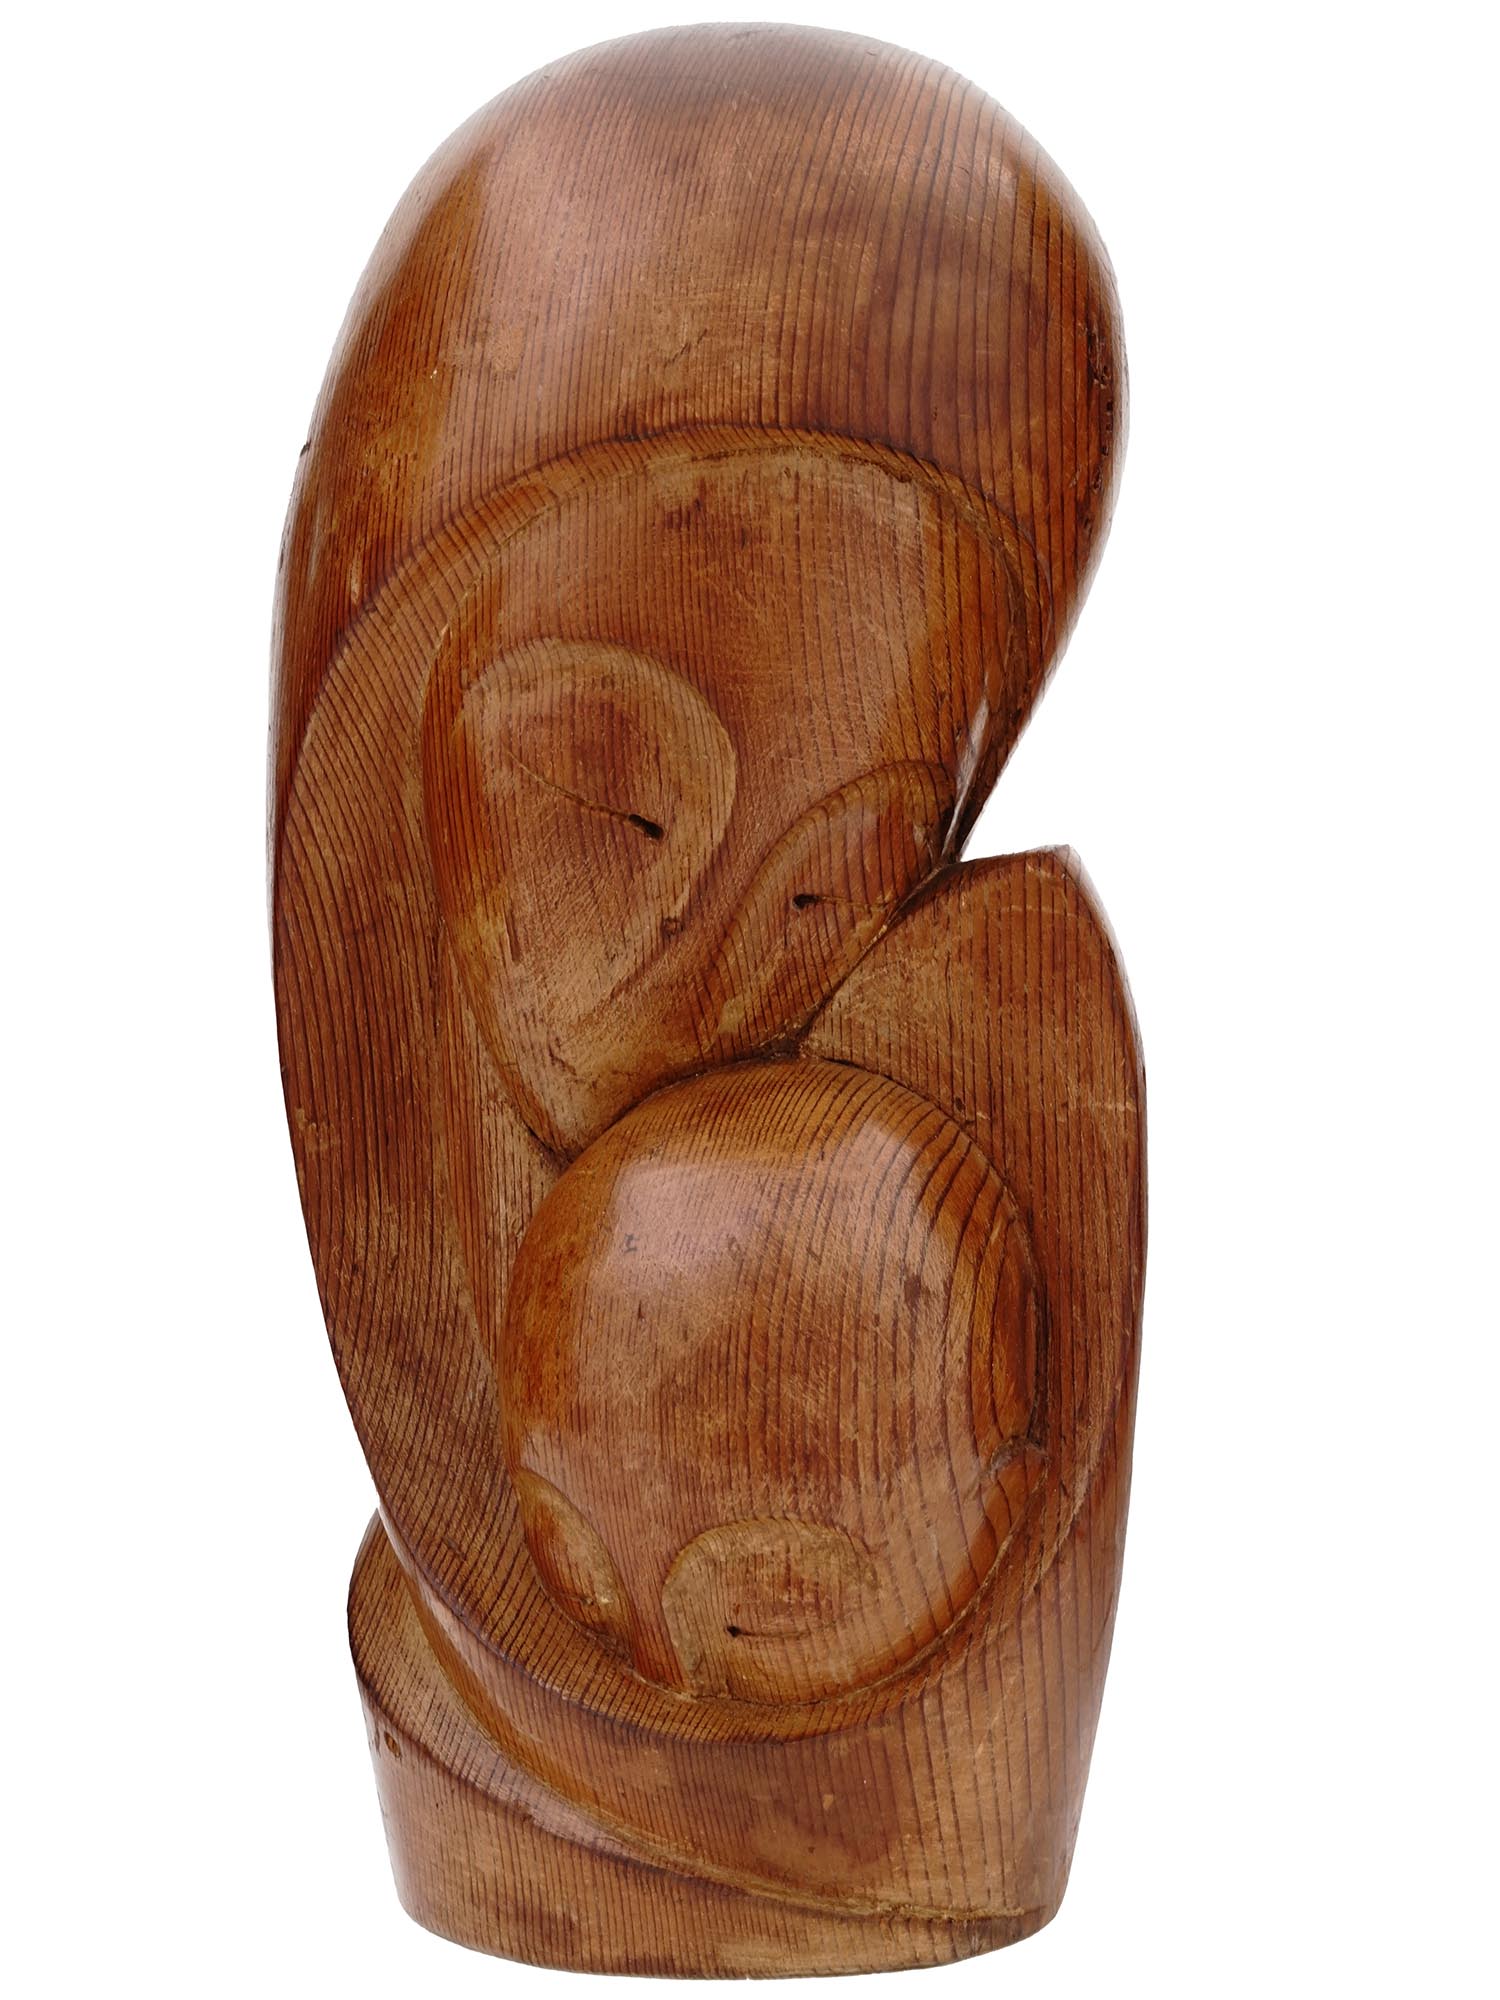 SCULPTURE MOTHER AND CHILD AFTER BRANCUSI SIGNED PIC-1